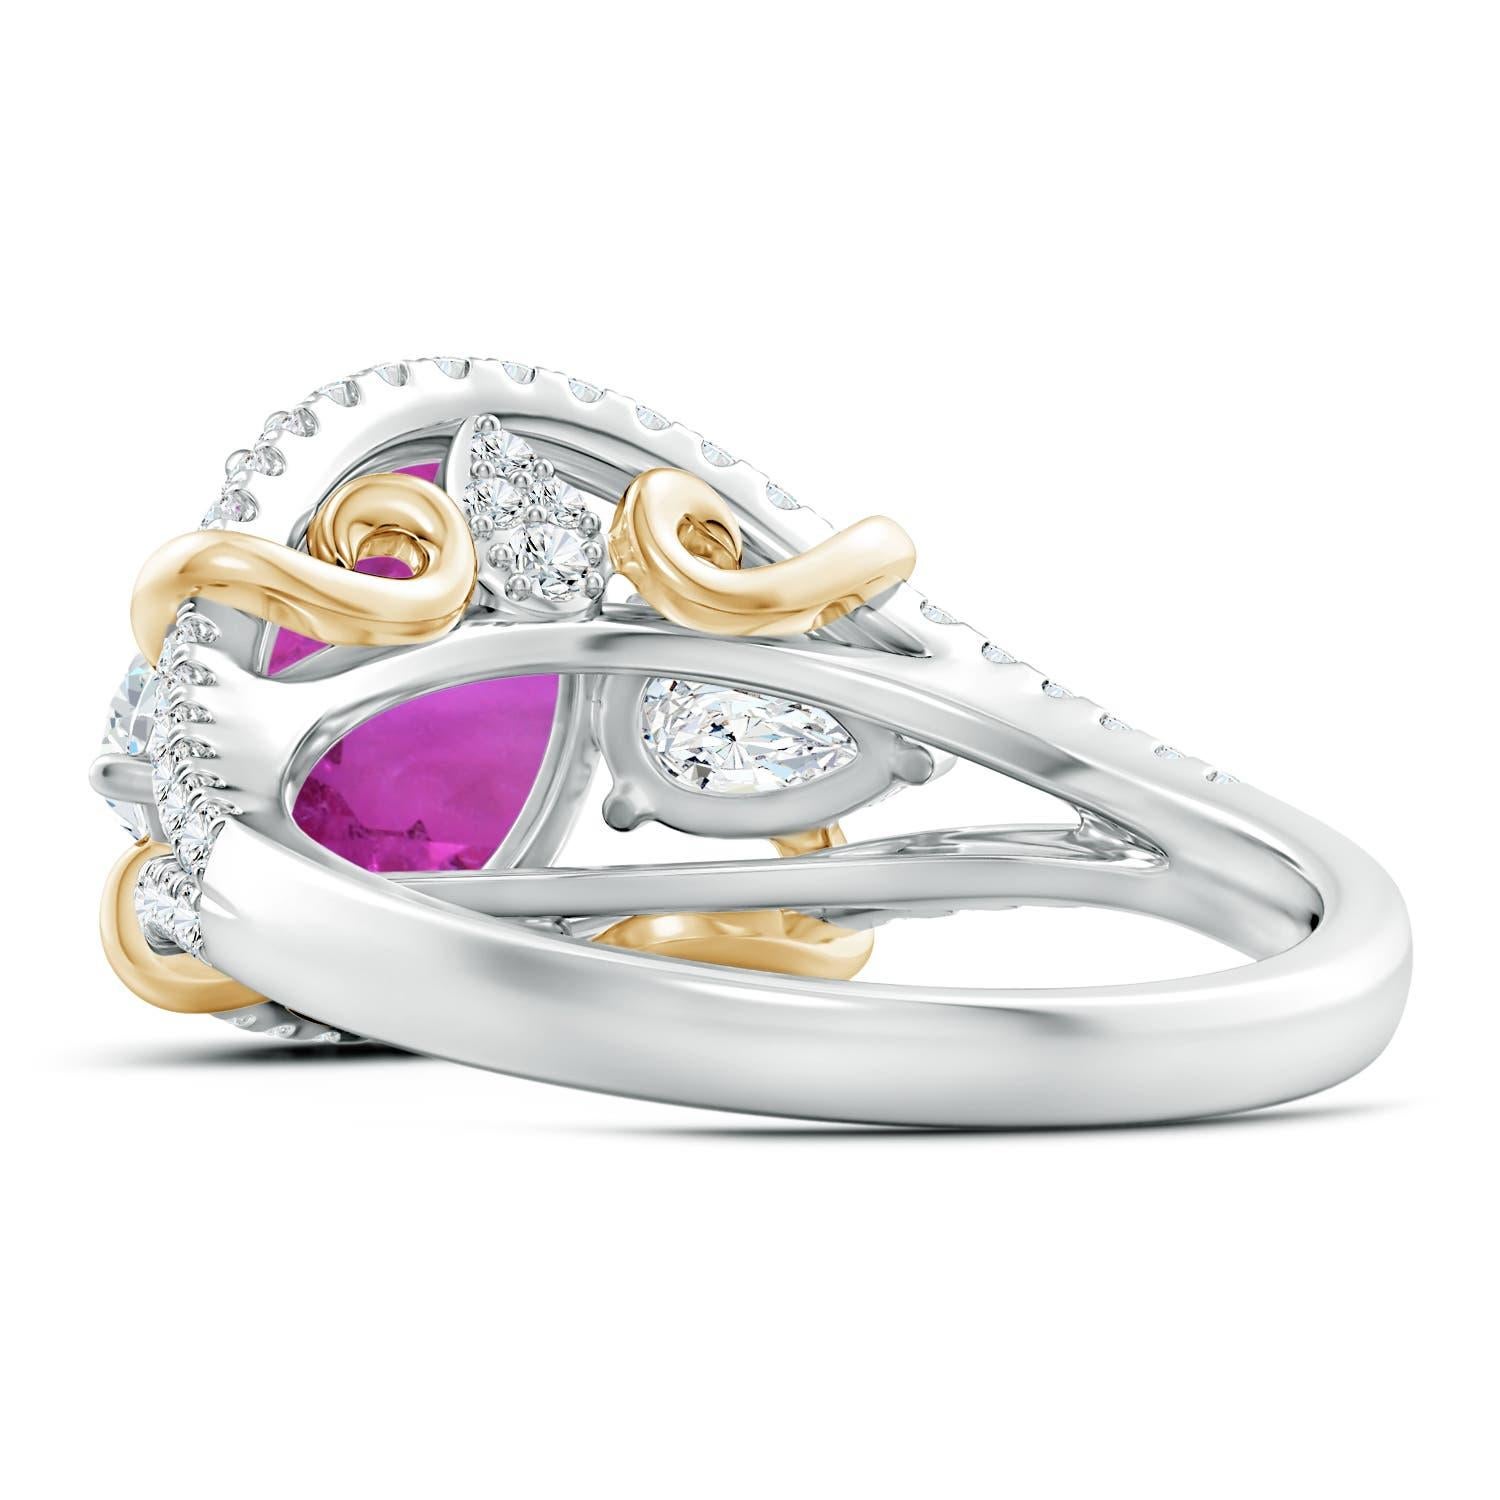 For Sale:  Angara GIA Certified Natural Pink Sapphire Ring in Yellow Gold with Diamonds 4